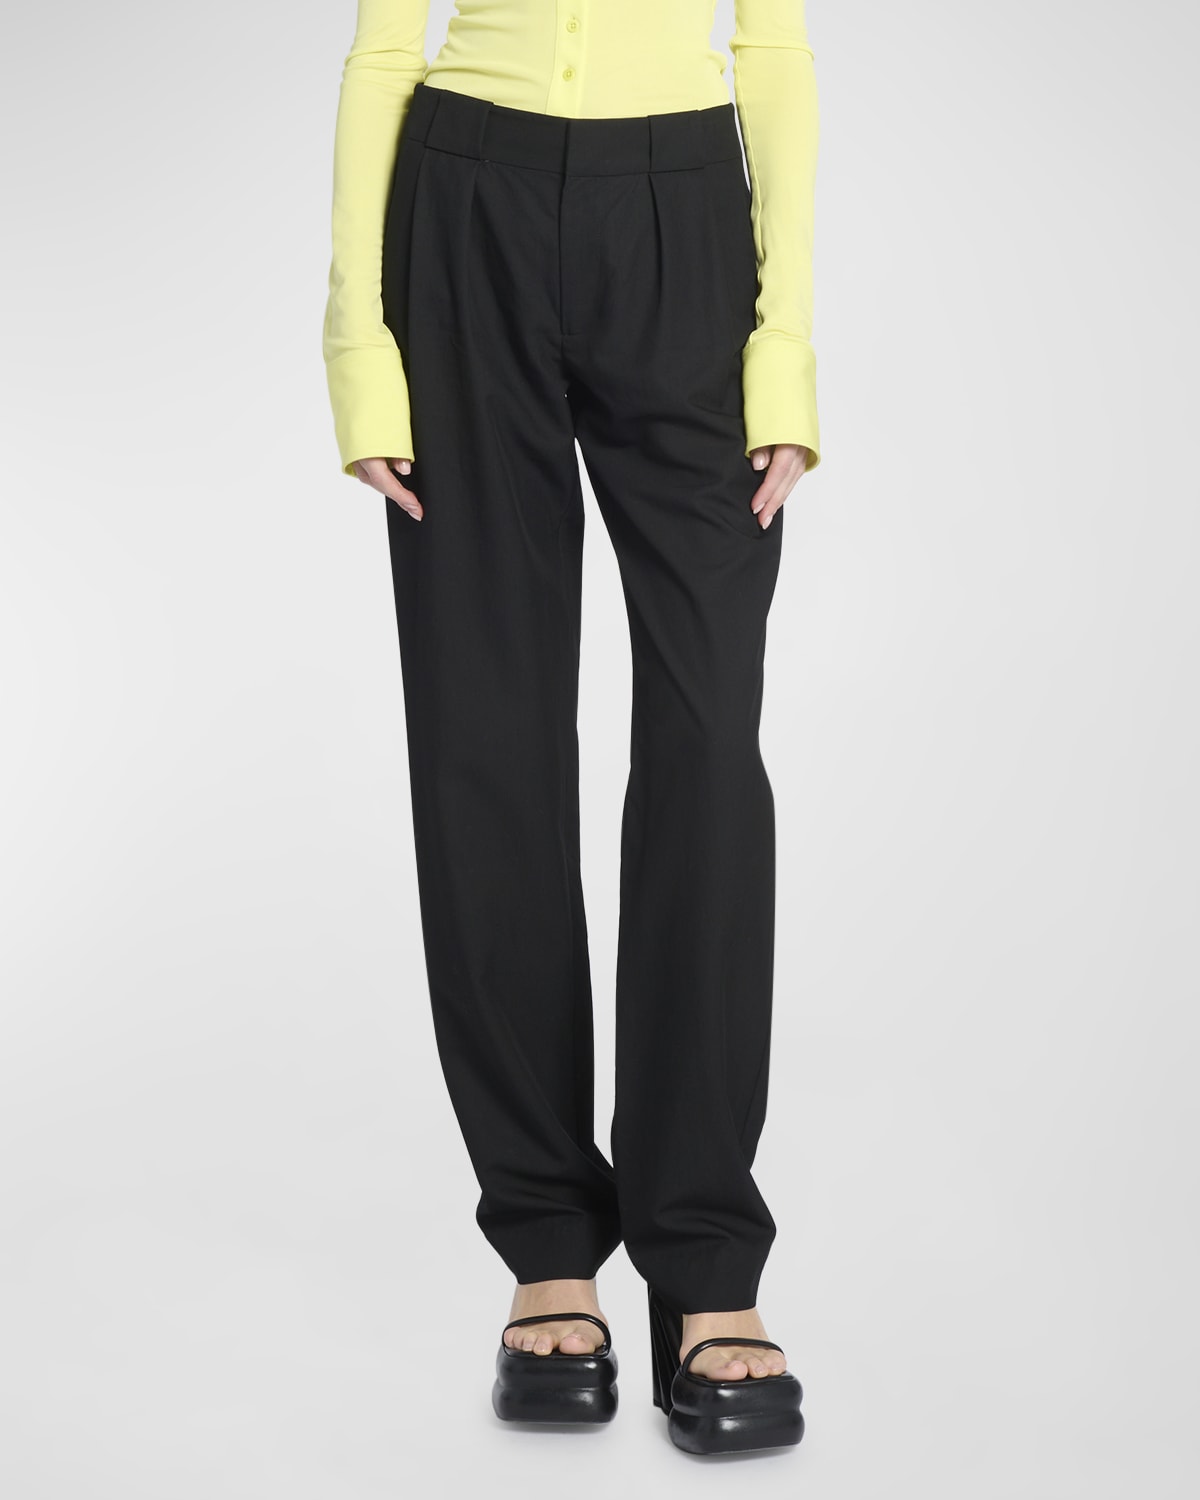 Proenza Schouler White Label Draped Suiting Trousers In Black